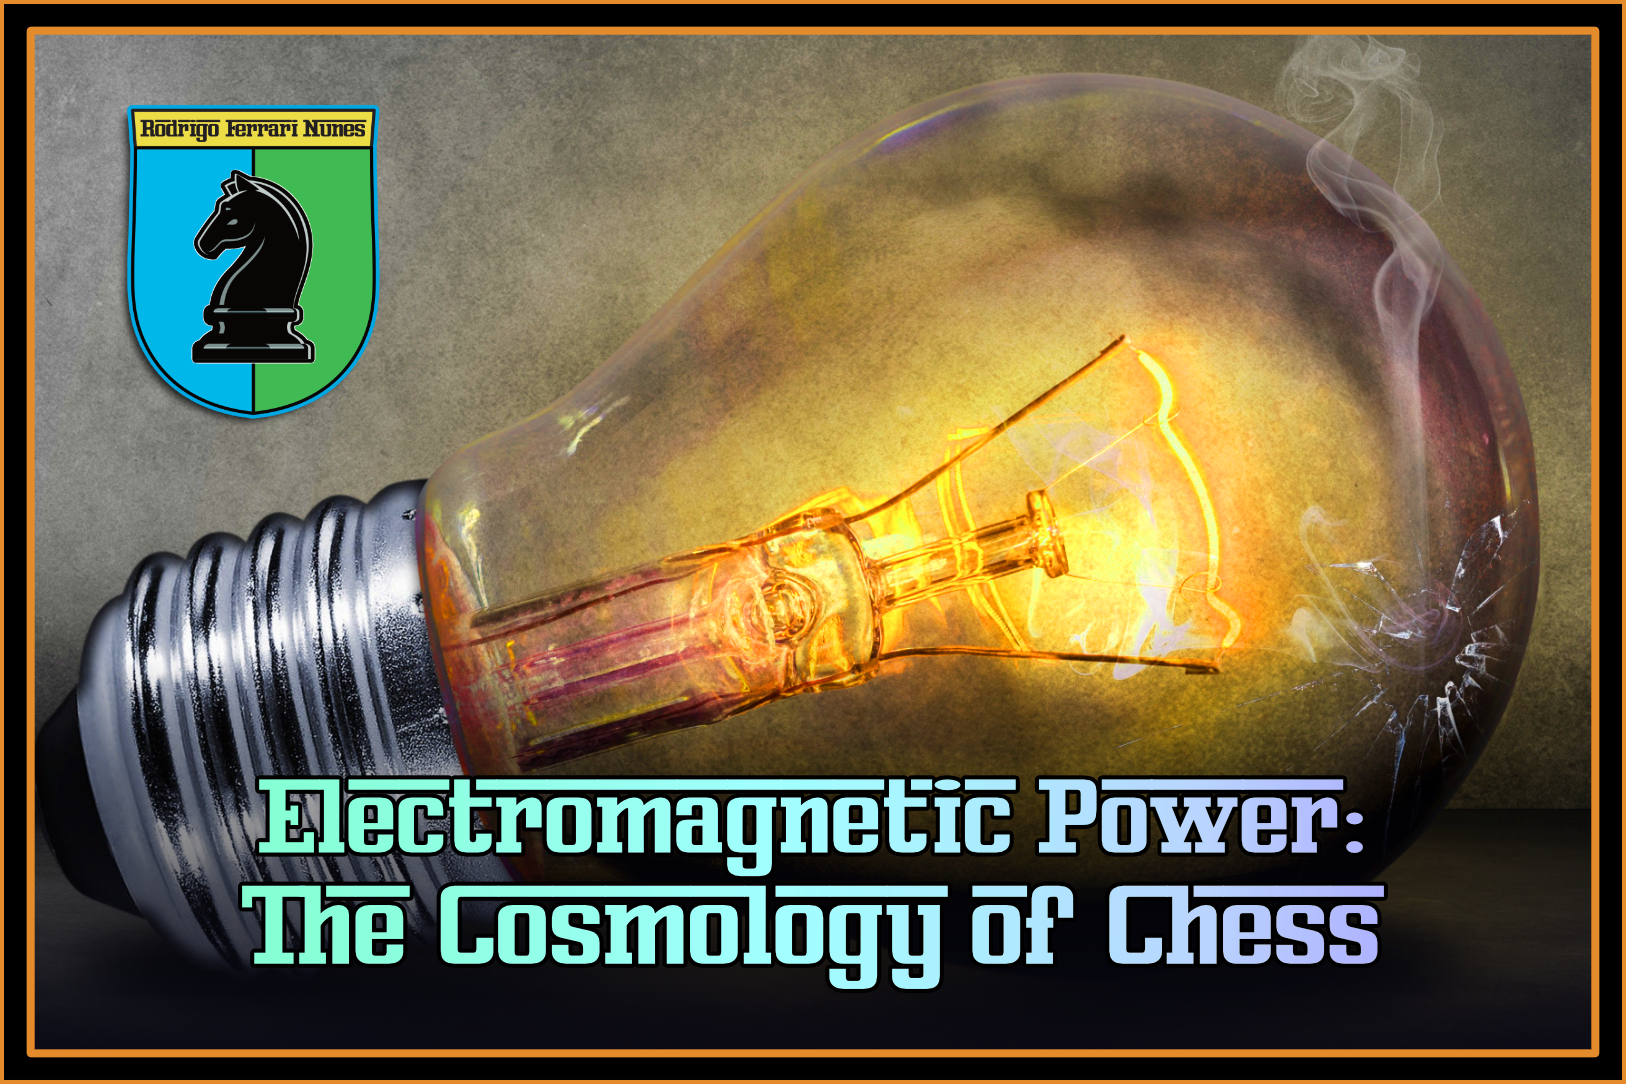 Electromagnetic Power: The Cosmology of Chess